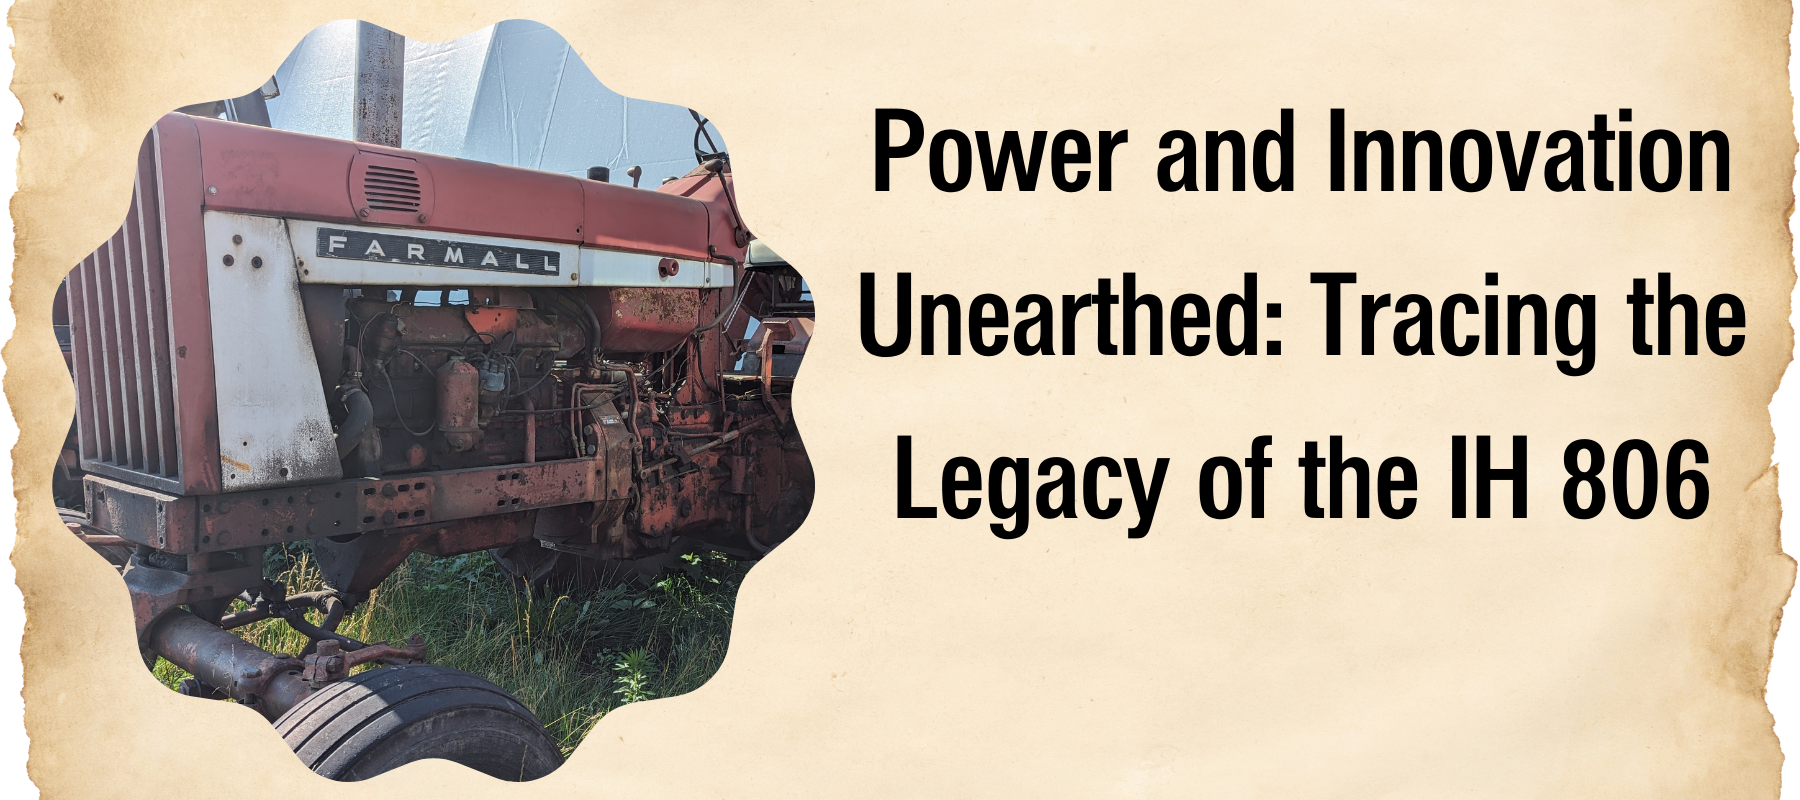 Power and Innovation Unearthed: Tracing the Legacy of the IH 806